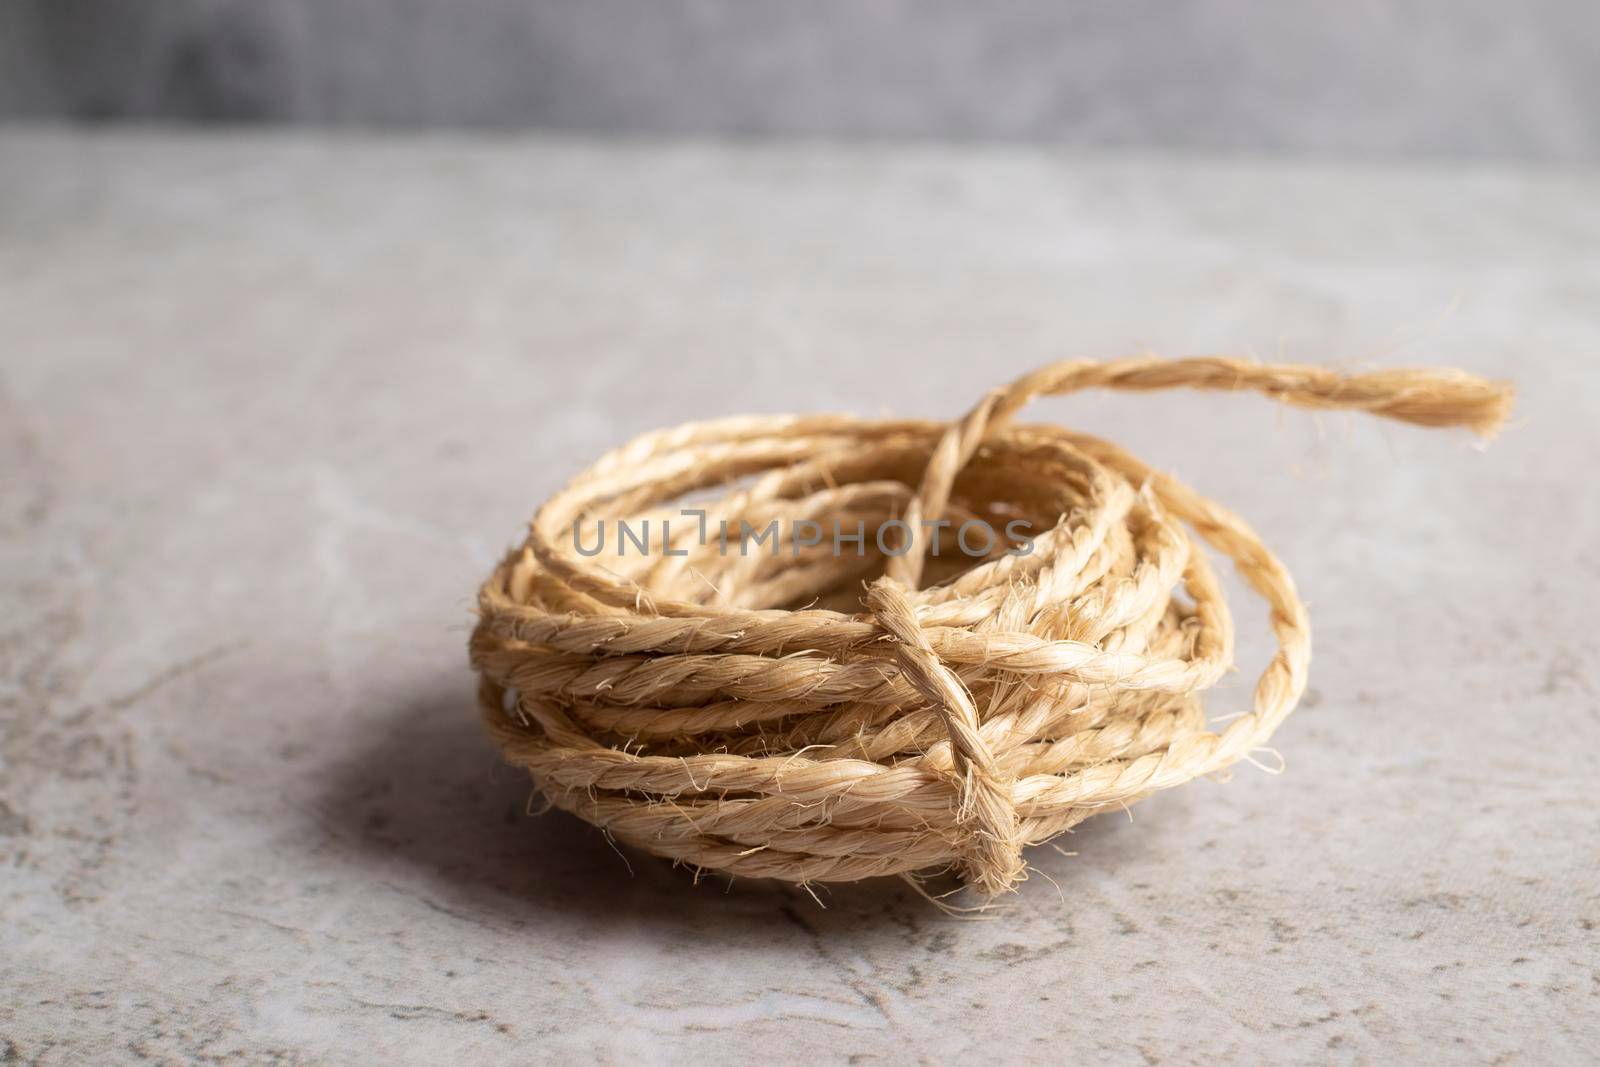 View of a roll of rope on a golden background by eagg13